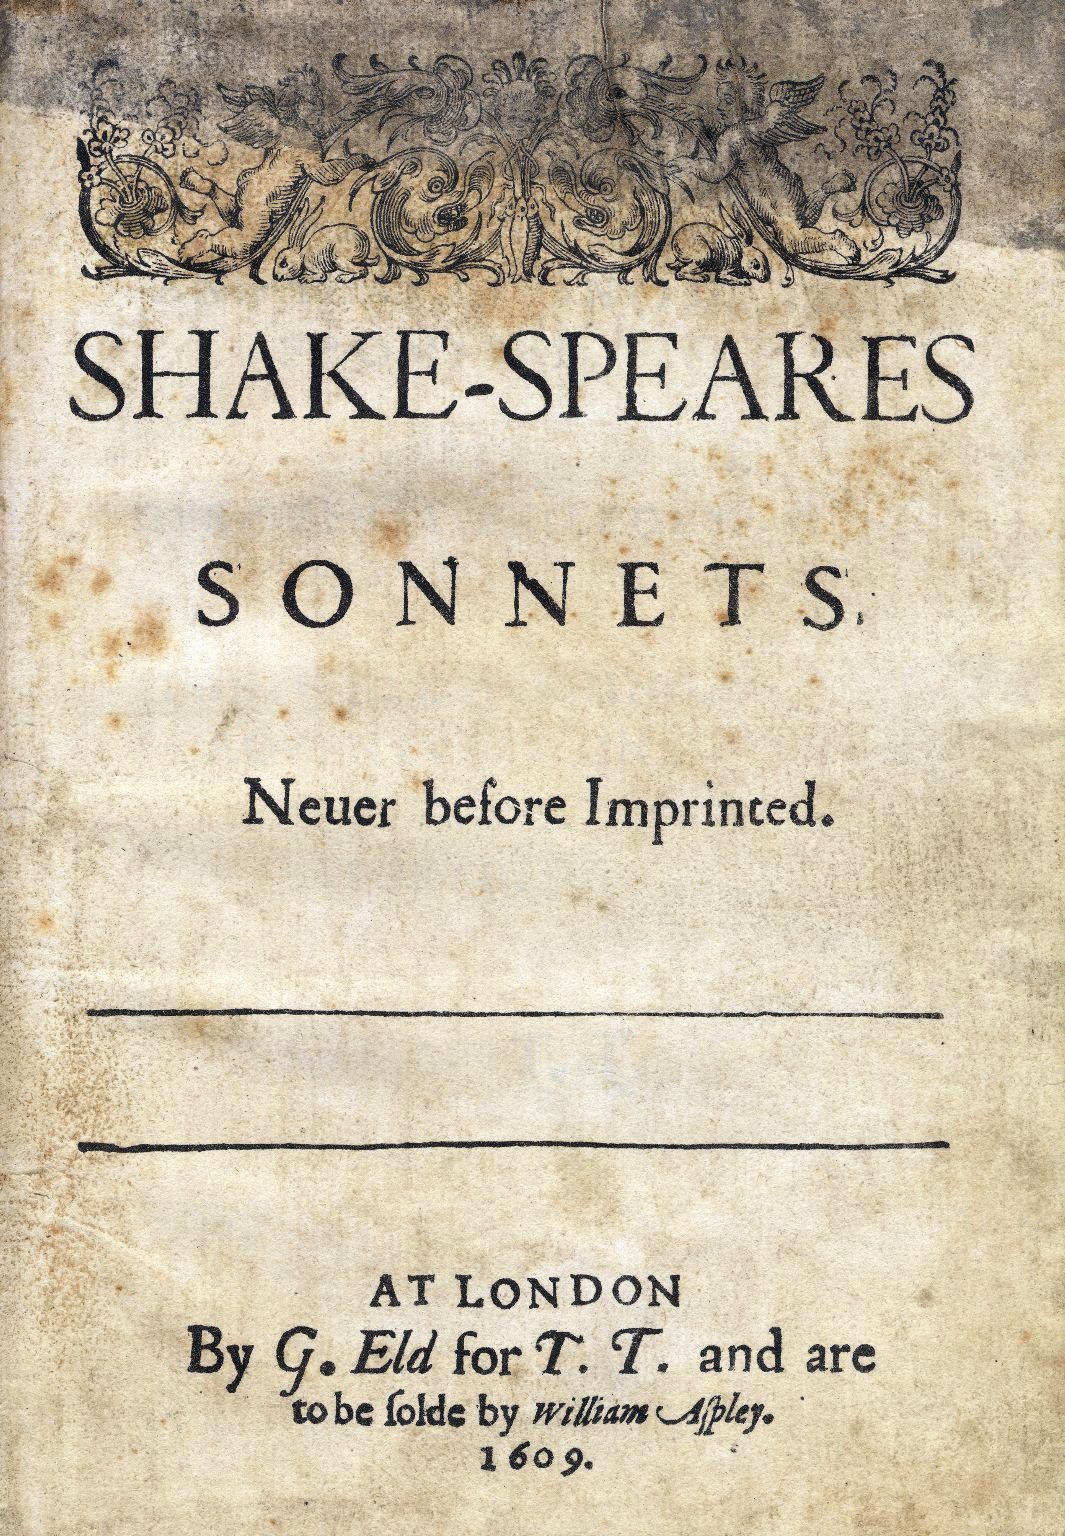 do sonnets use iambic pentameter